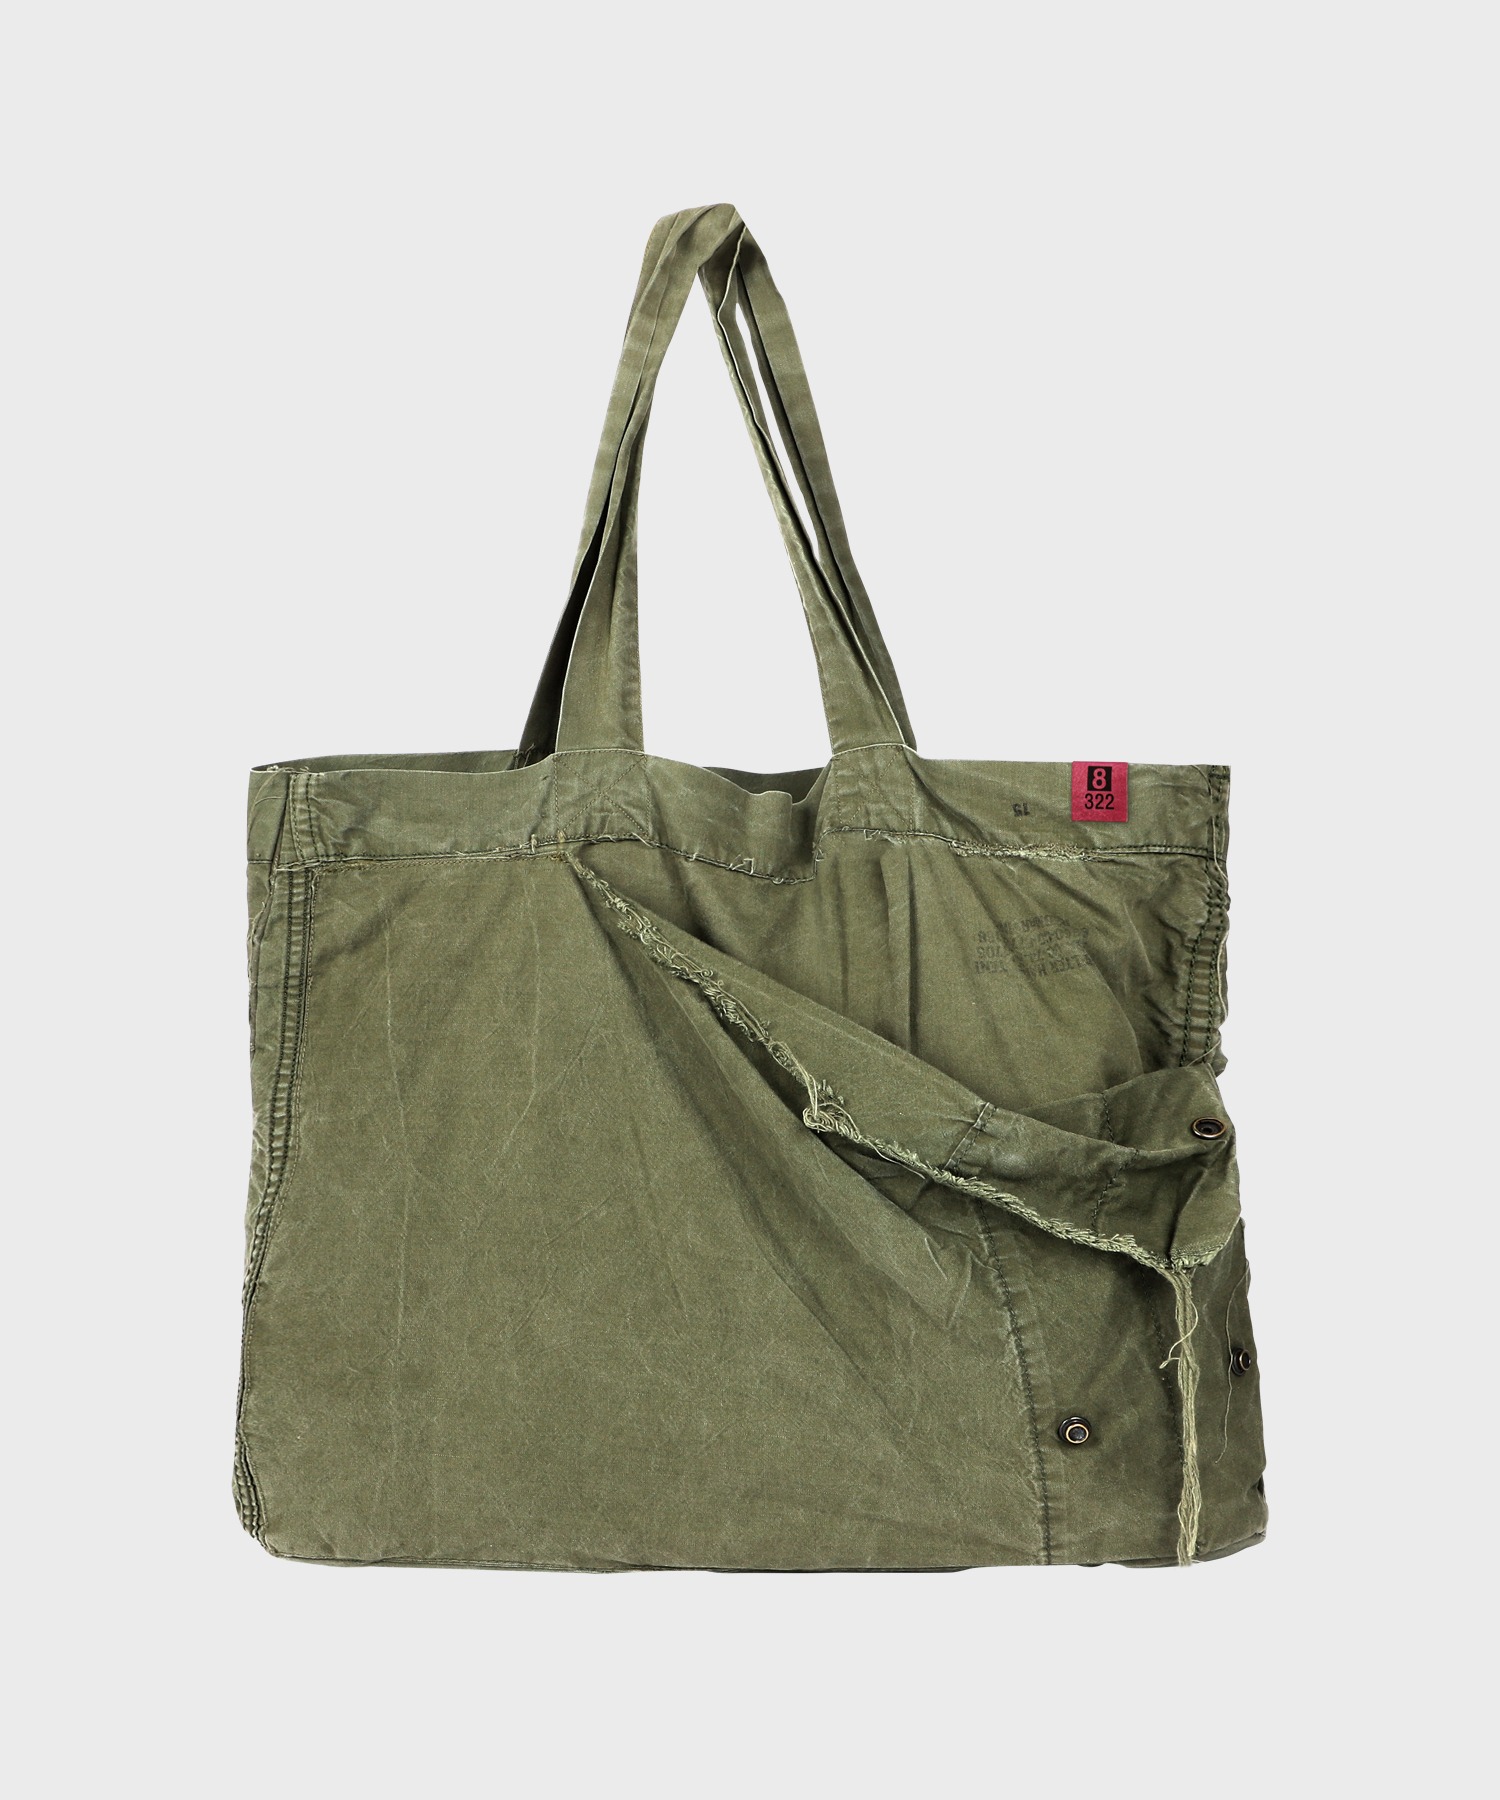 AMSTERDAM TOTE BAG (OLIVE DRAB) / UPCYCLED